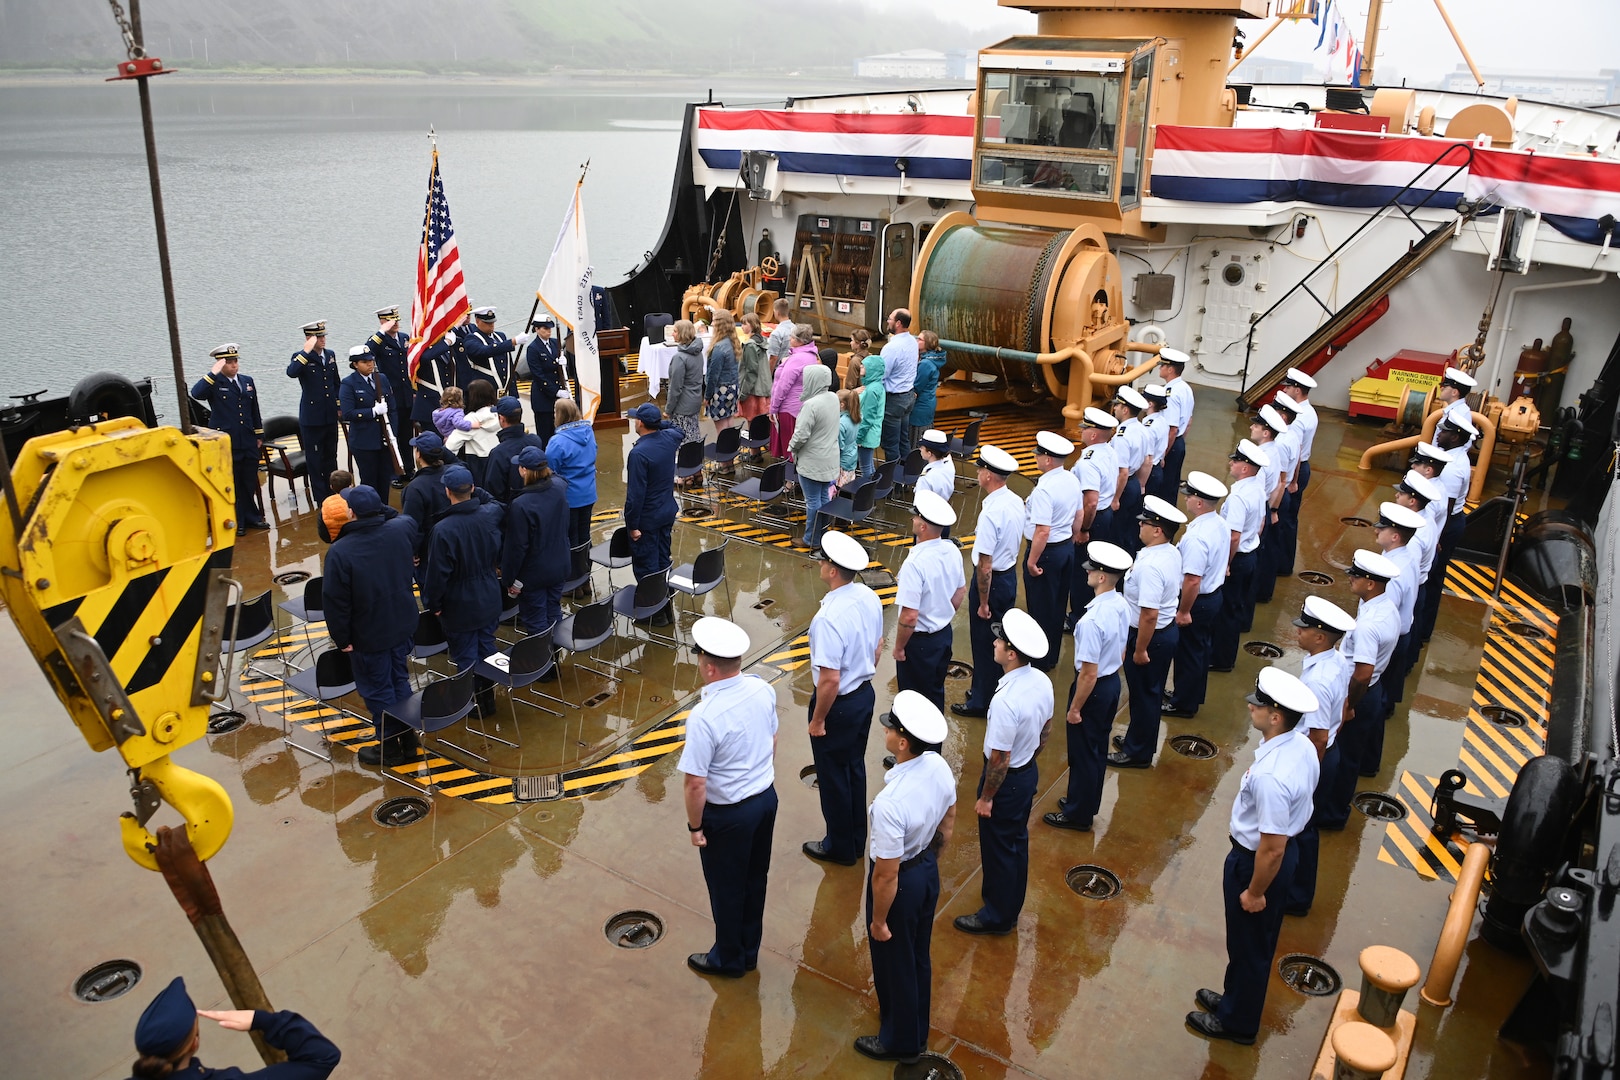 Coast Guard Cutter Cypress personnel stand at attention during a change-of-command ceremony held at Base Kodiak in Kodiak, Alaska, Aug. 3, 2023. Base Kodiak is the largest land installation of the Coast Guard and serves as the senior Mission Support touchstone for Coast Guard operations within the 17th District across Alaska, standing shoulder-to-shoulder with its operational partners to ensure the delivery of professional, responsive and cost-effective services to the American public. U.S. Coast Guard photo by Petty Officer 3rd Class Ian Gray.